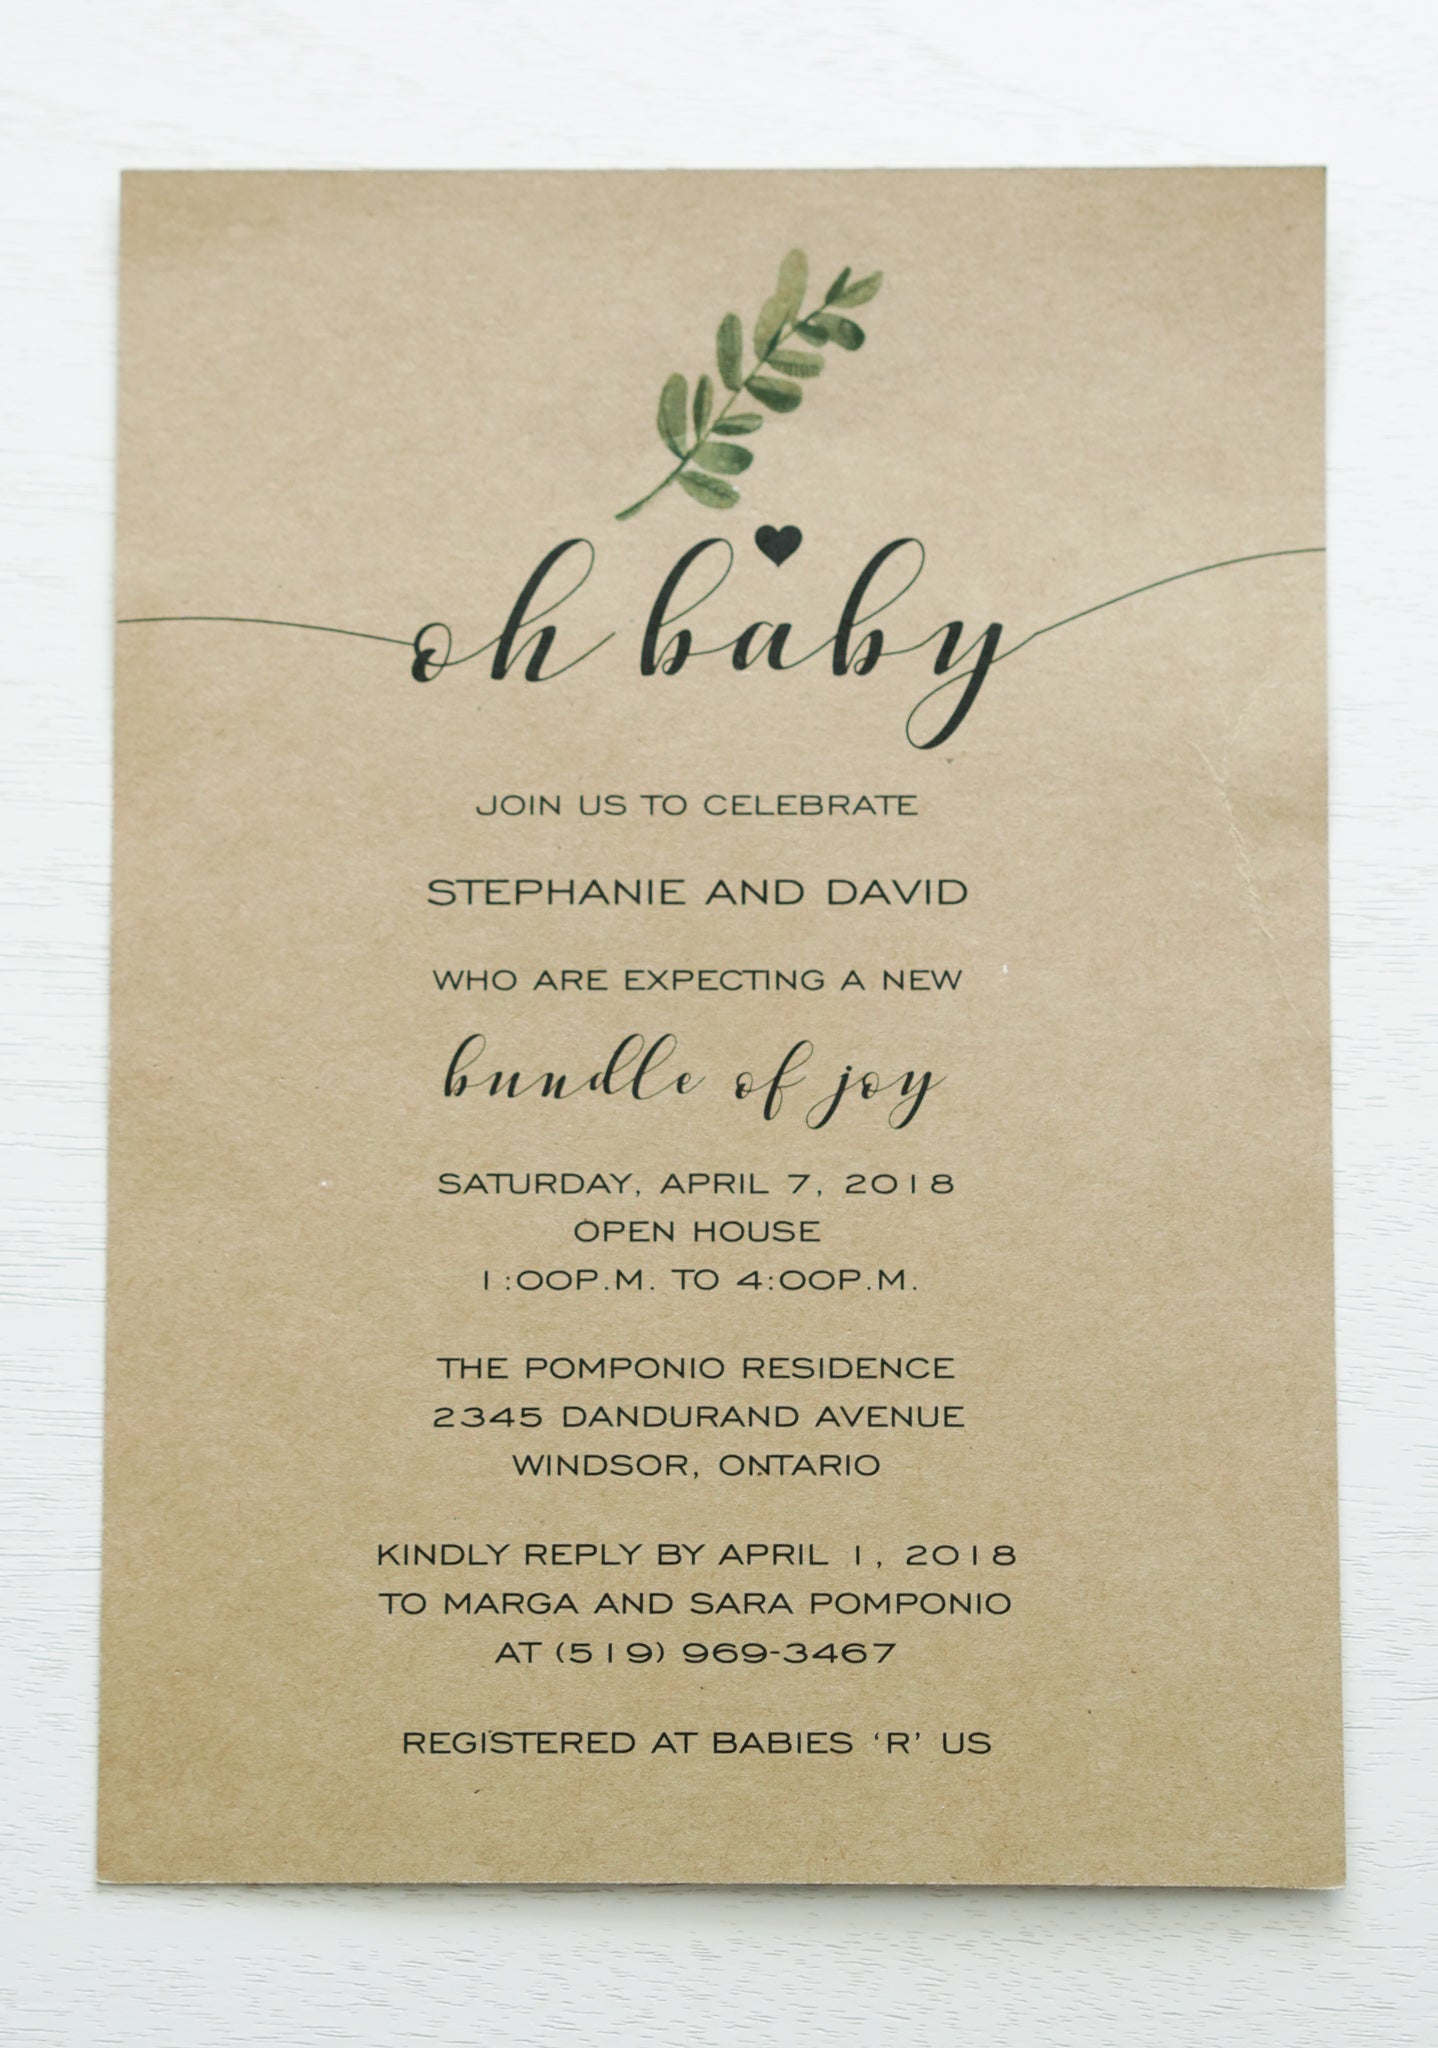 alt=“Simple rustic gender neutral baby shower invitation features kraft card stock with a greenery detail and an “Oh Baby” sentiment with heart”